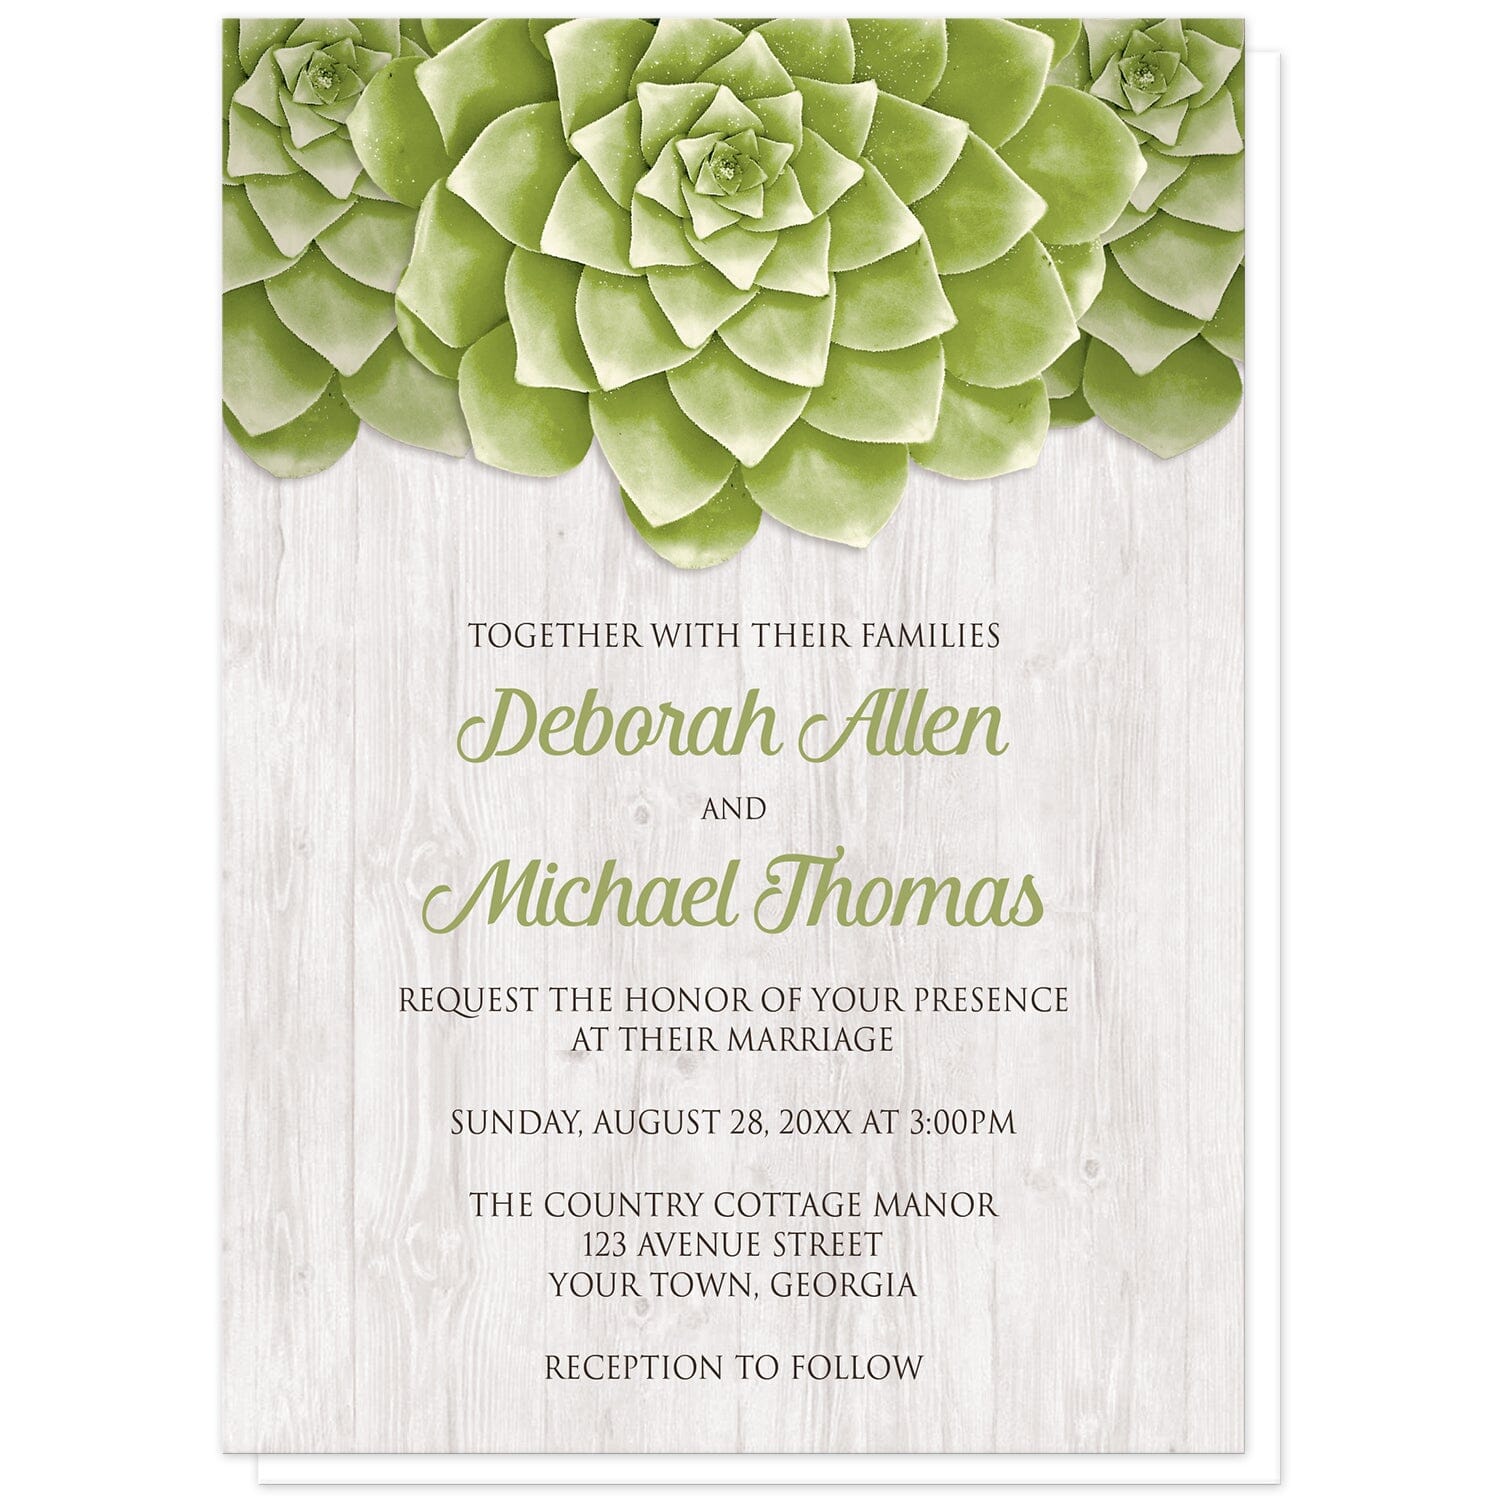 Succulent Whitewashed Wood Wedding Invitations at Artistically Invited. Cool and fresh succulent whitewashed wood wedding invitations with three large green succulents along the top of the invitations over a rustic whitewashed wood background design. Your personalized marriage celebration details are custom printed in green and dark brown over the whitewashed wood background below the succulents. 